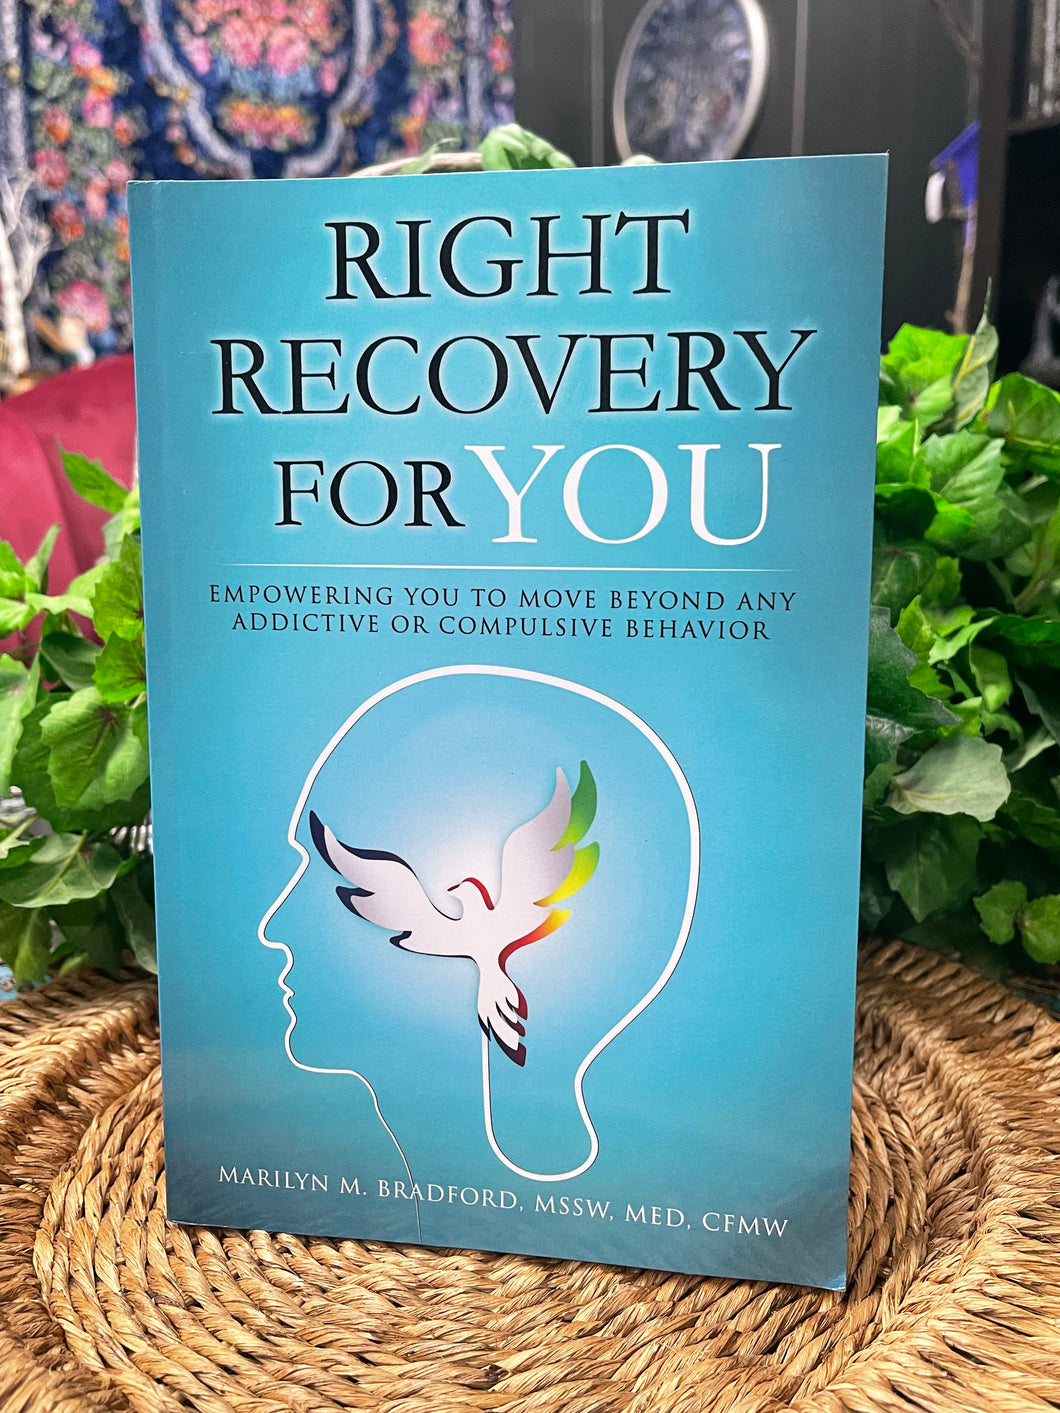 Right Recovery for you.